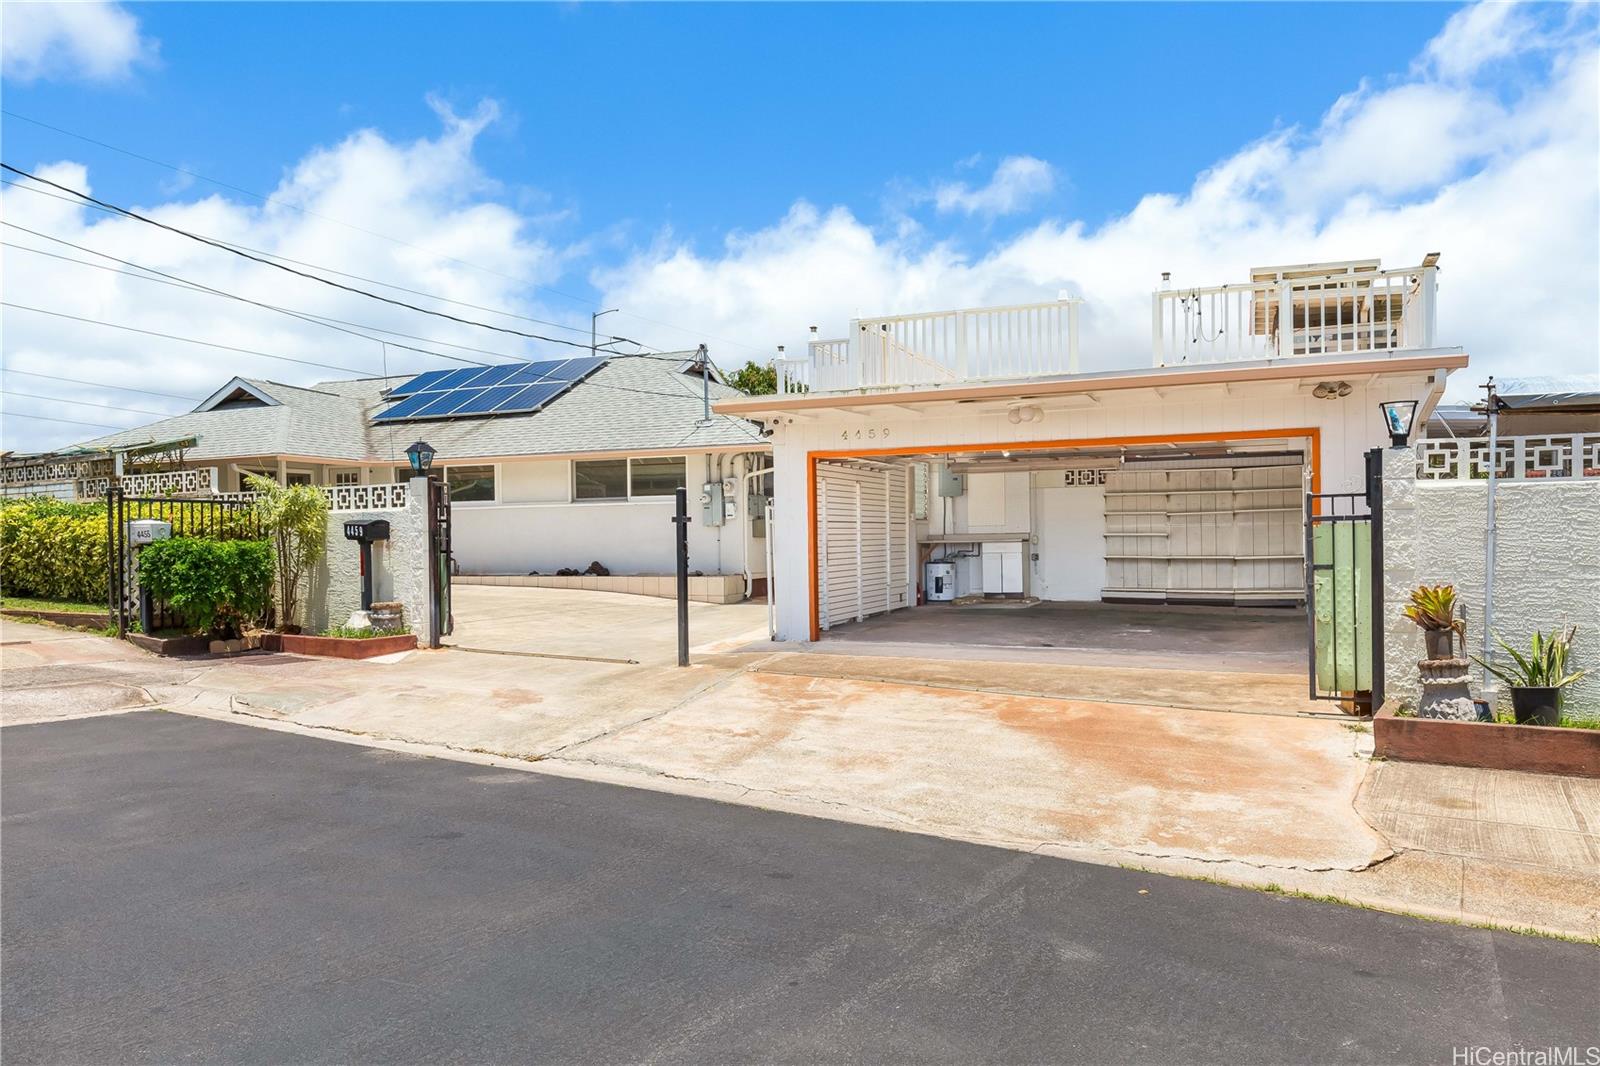 Fully gated with a large 2 garage and ample on site parking.